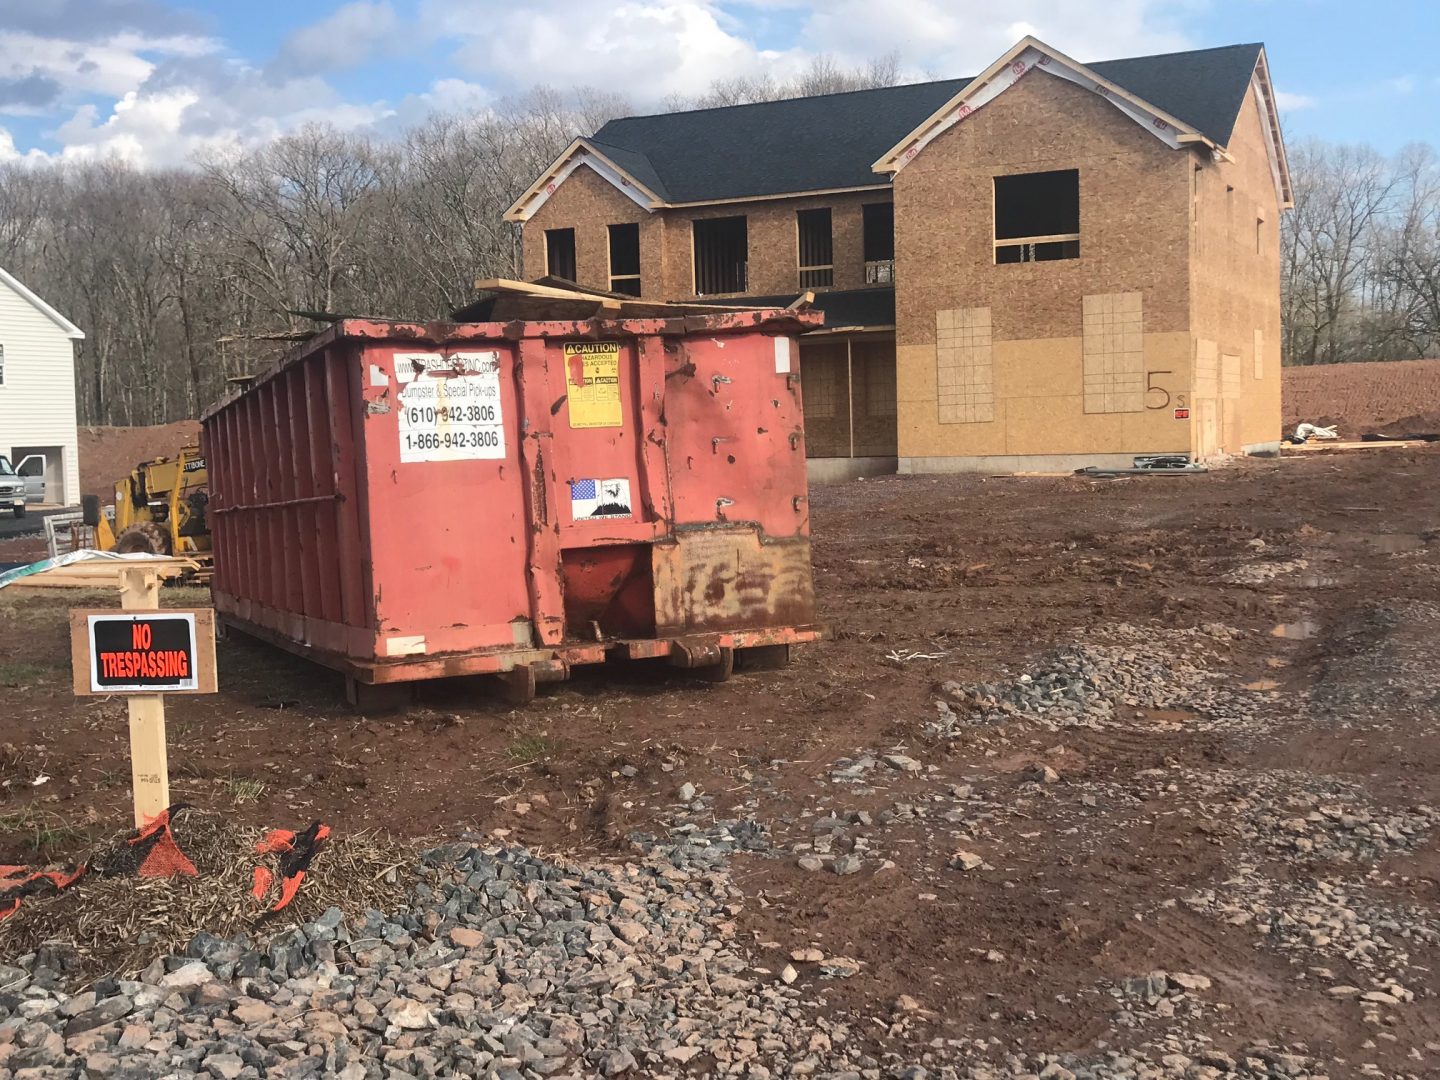 Work stopped on this house in Montgomery County, Pa., following a shutdown order from Pennsylvania Gov. Tom Wolf. Builder Jon Sukonik said the home was one workday away from having doors, windows and weather barrier installed.